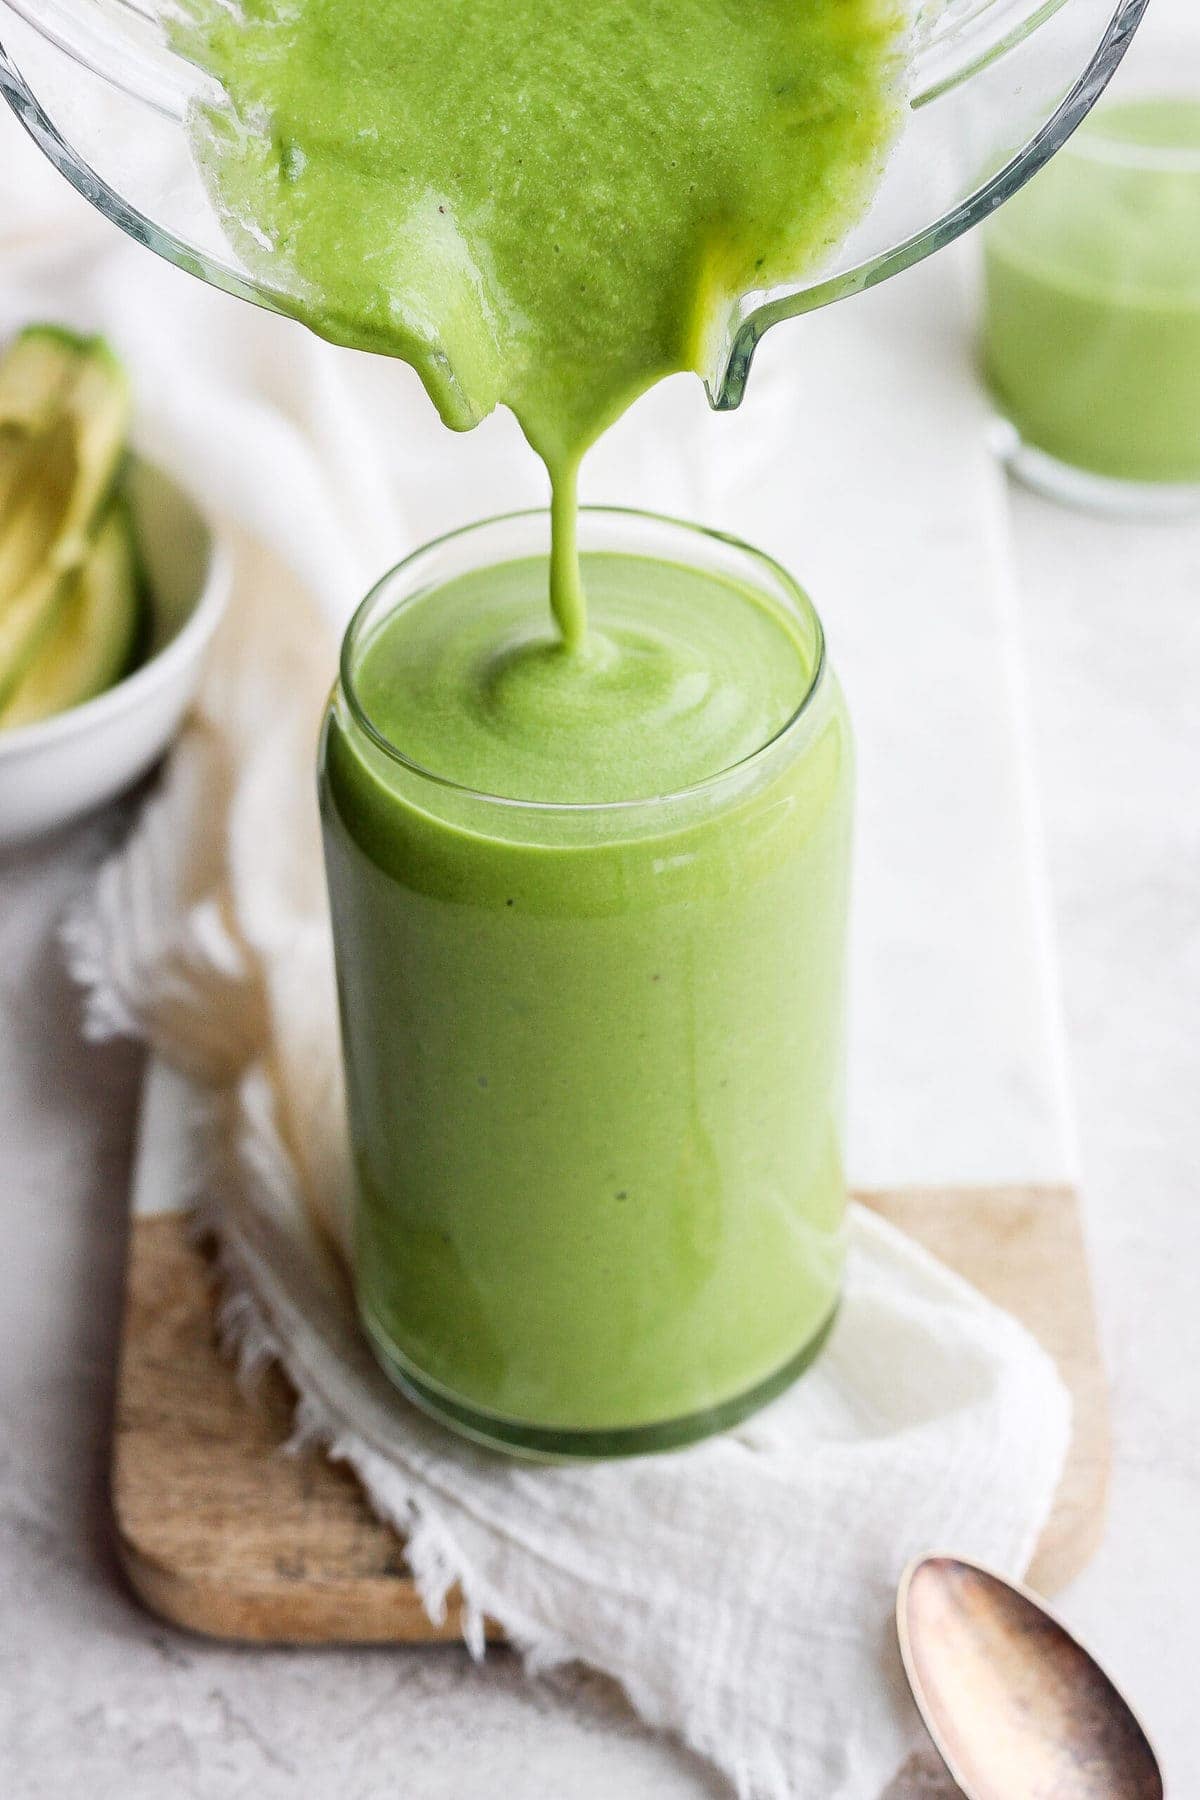 Delicious Avocado Smoothie (4 ingredients!) - Fit Foodie Finds